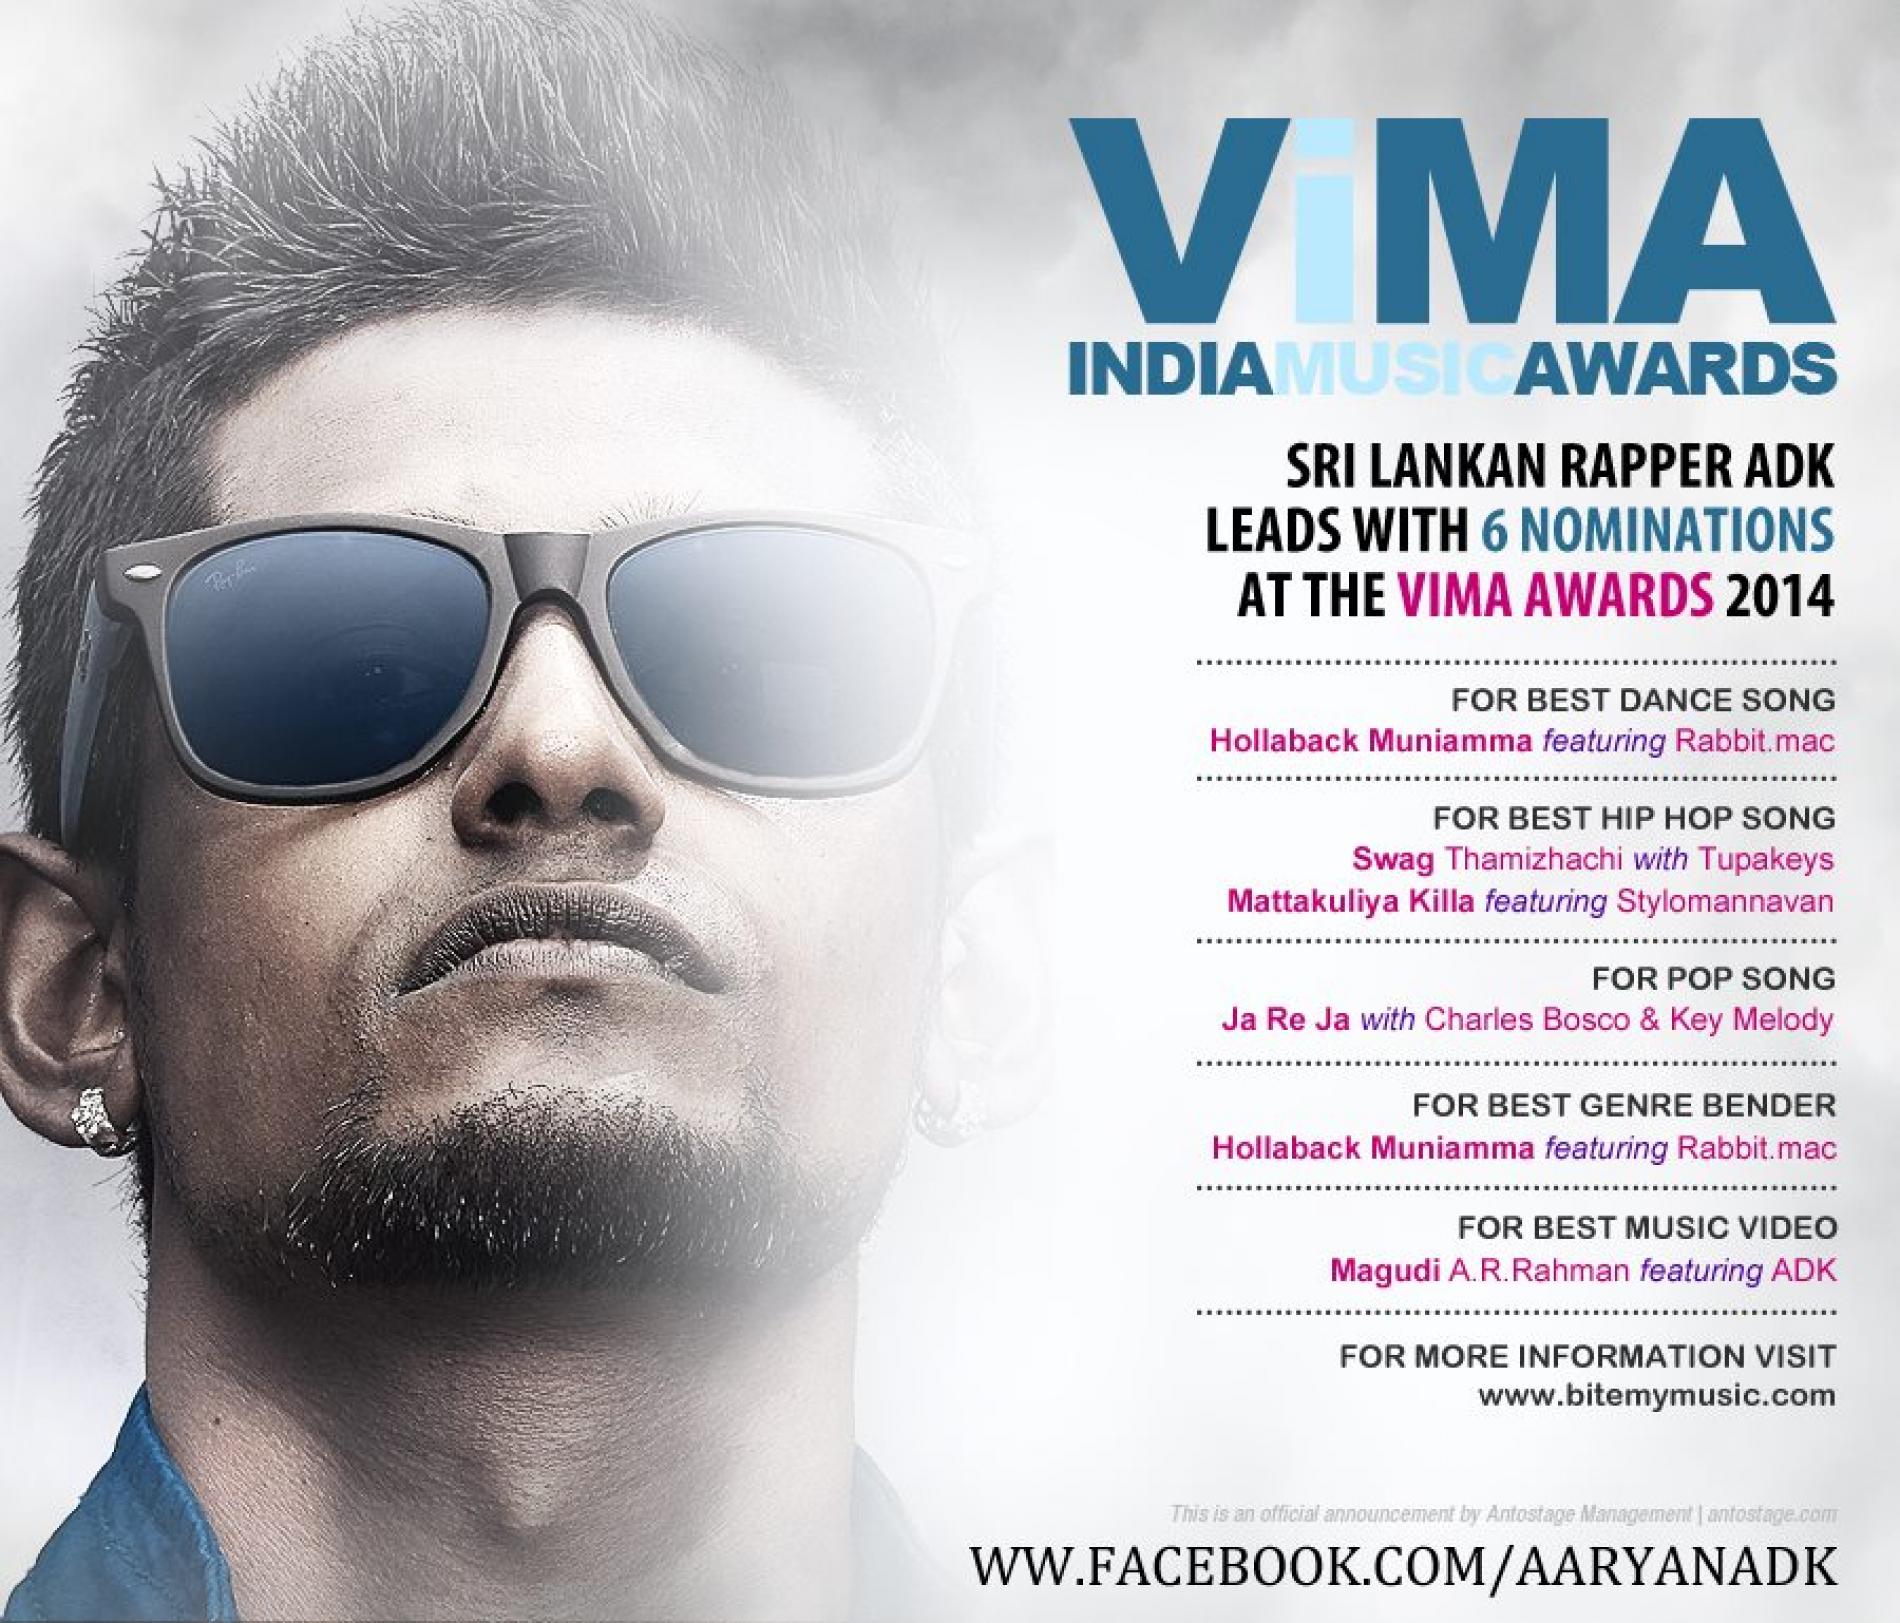 Aaryan Dinesh K & Nevi’im Make It Into The Final List Of The 1st VIMA INDIA Music Awards